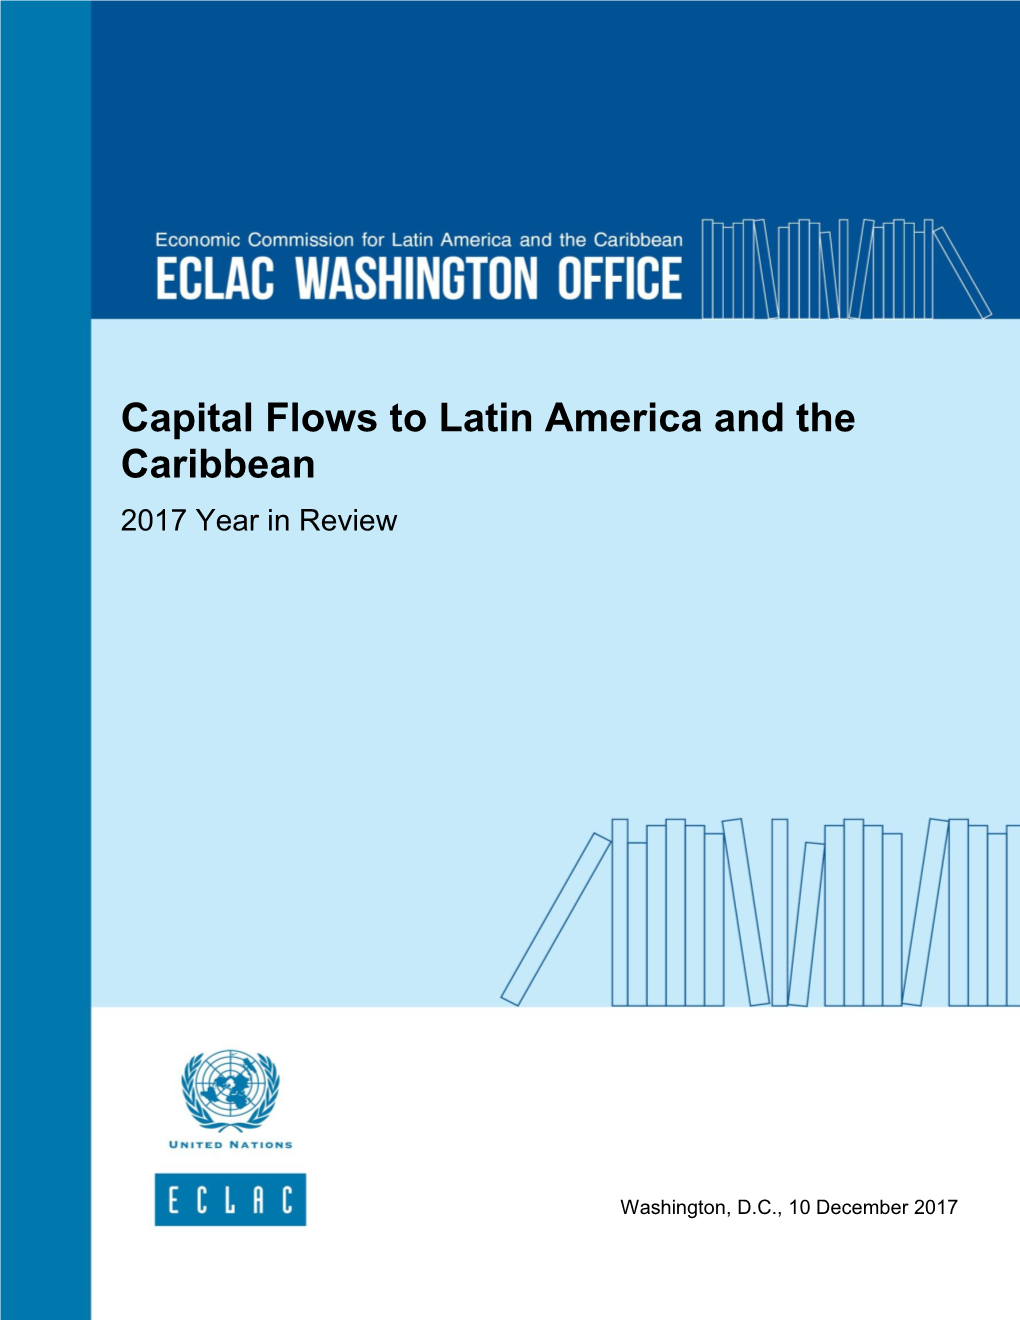 Capital Flows to Latin America and the Caribbean 2017 Year in Review